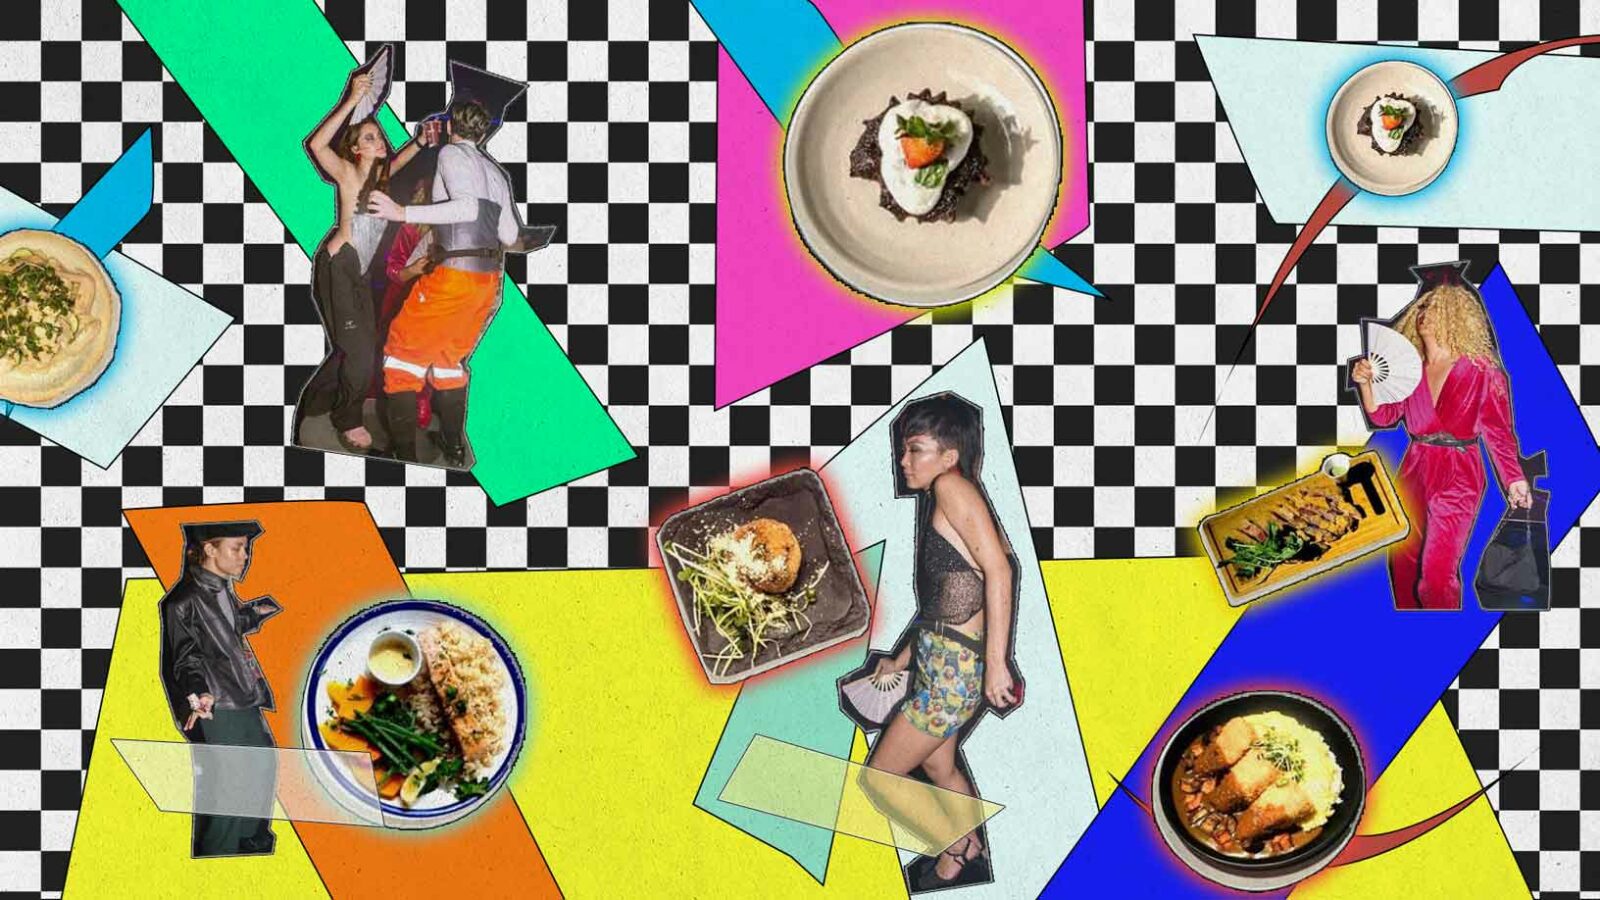 From Dance To Food, This Creative Collective Is Imagining A Unique Takeaway Experience In Hain